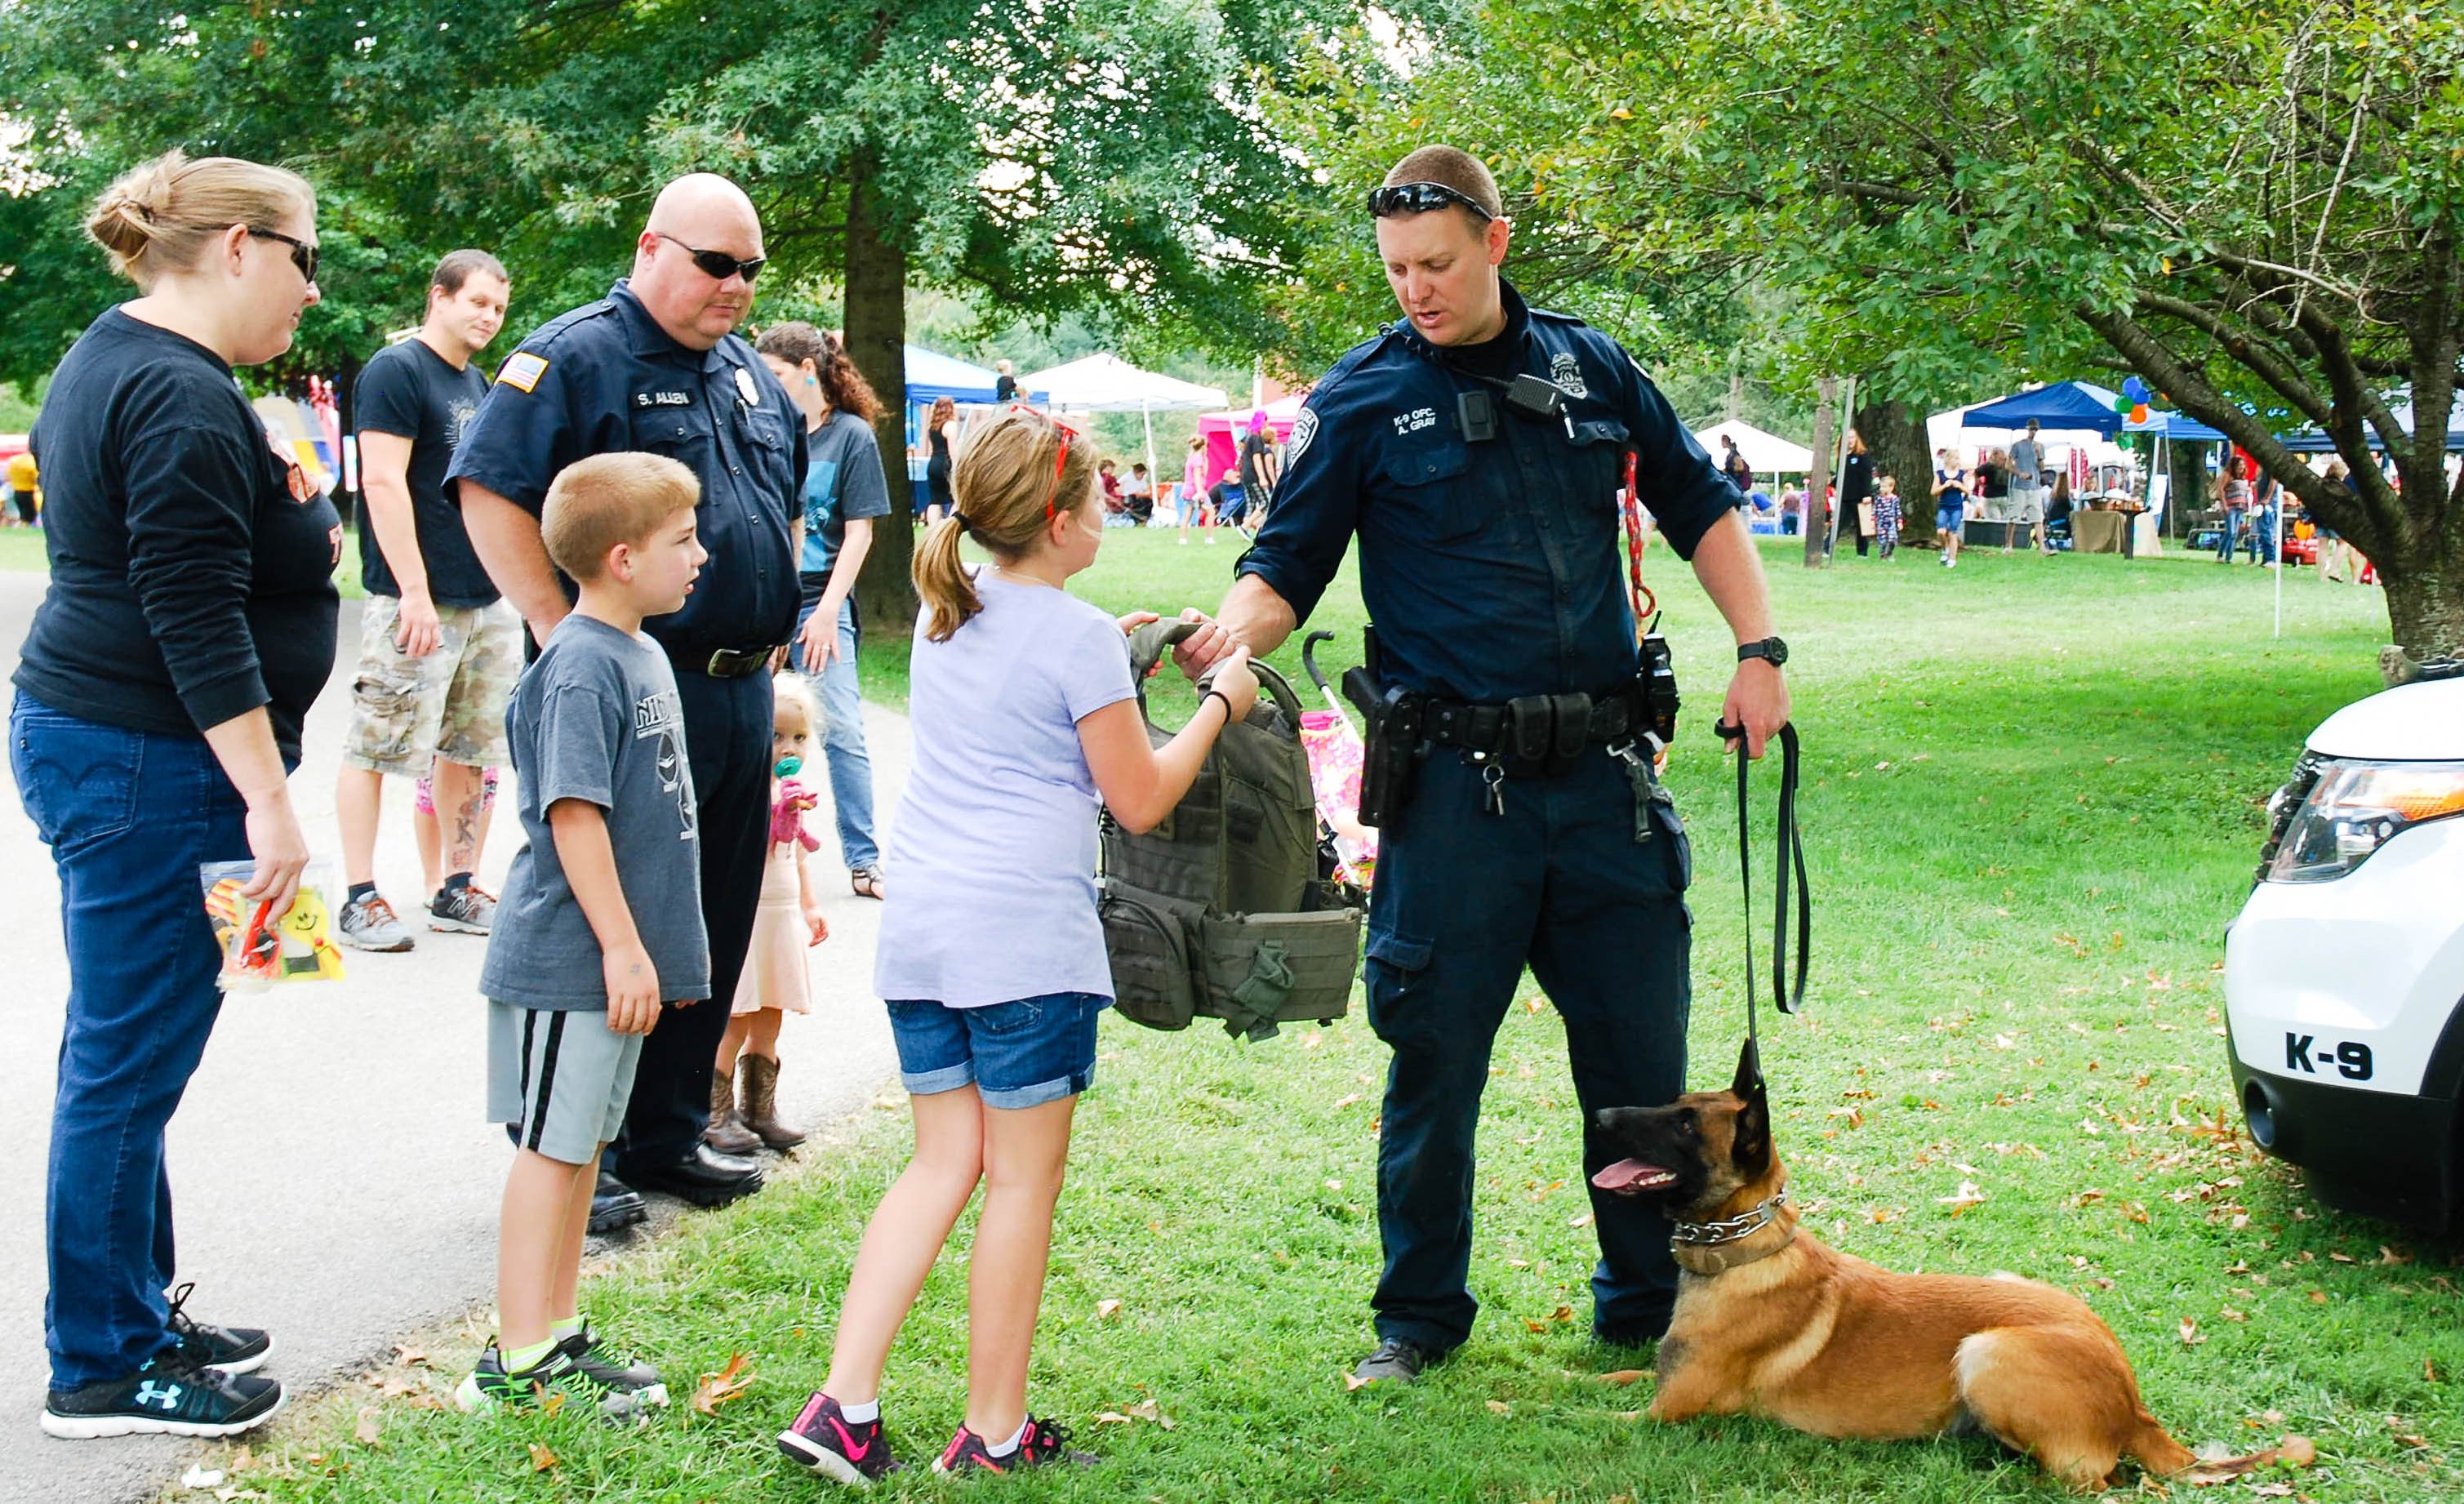 Police officer and dog doing demonstration with family watching 